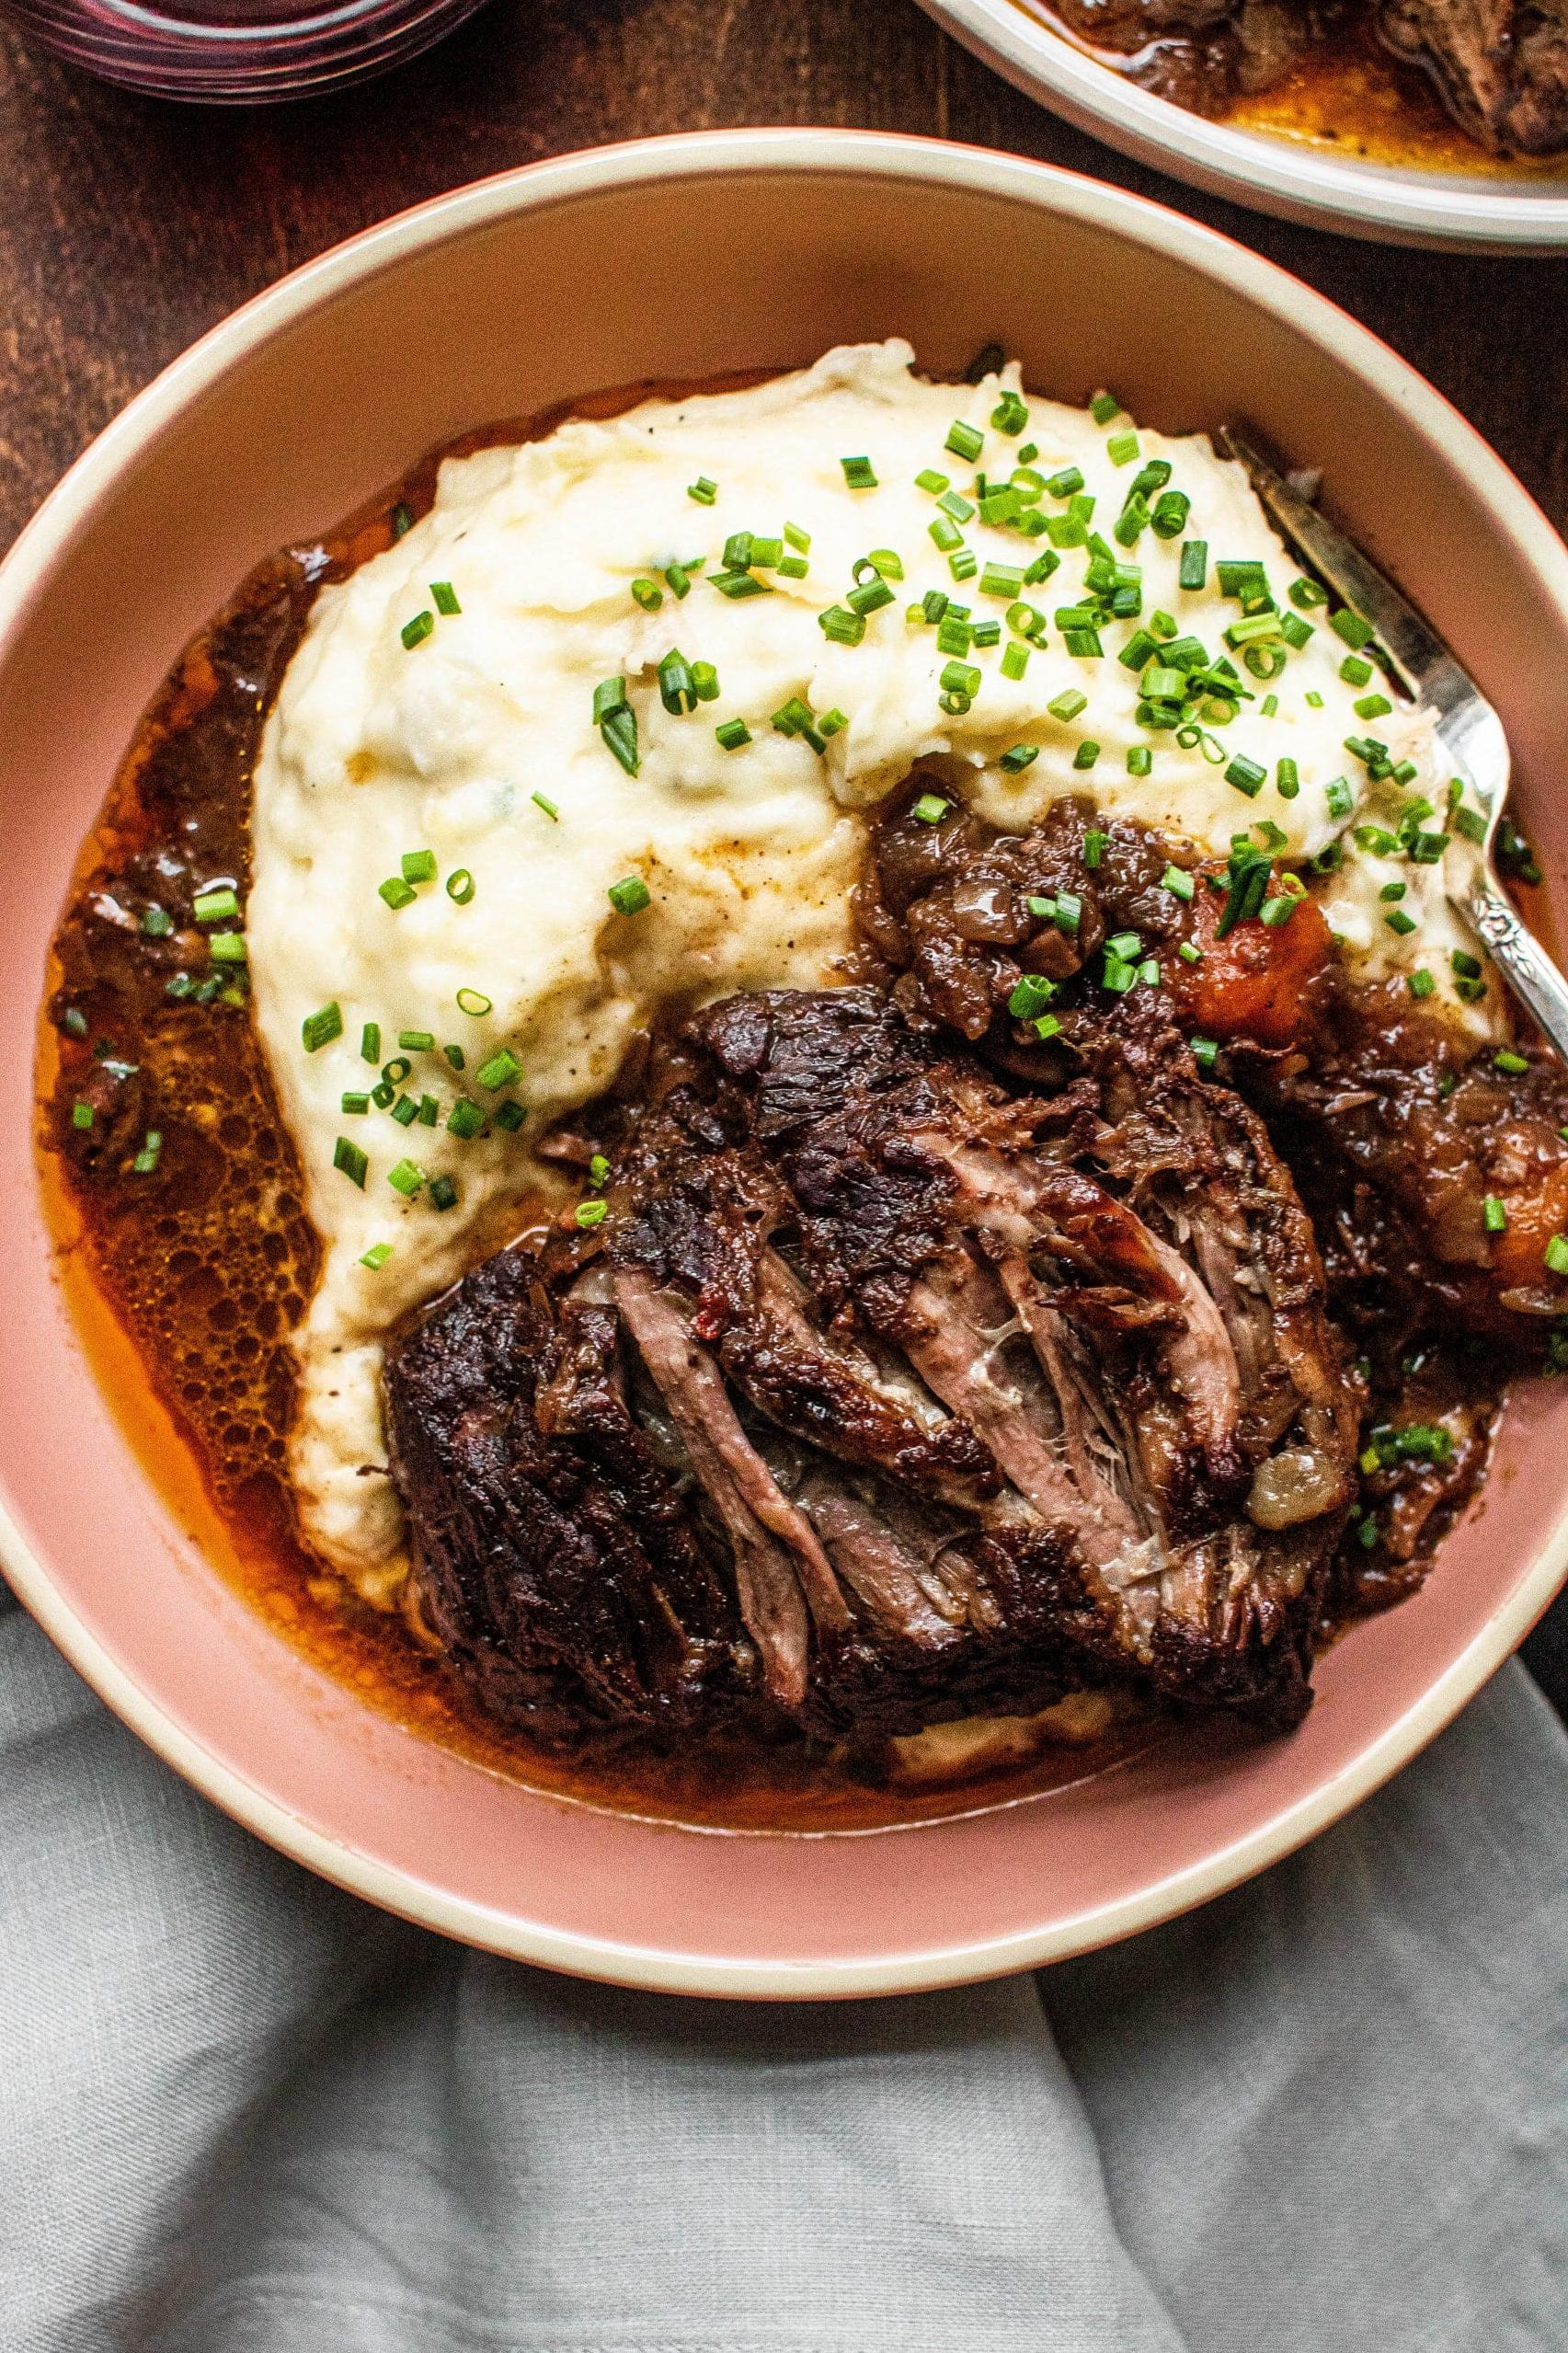  Aromatic red wine blends perfectly with this slow-cooked beef dish